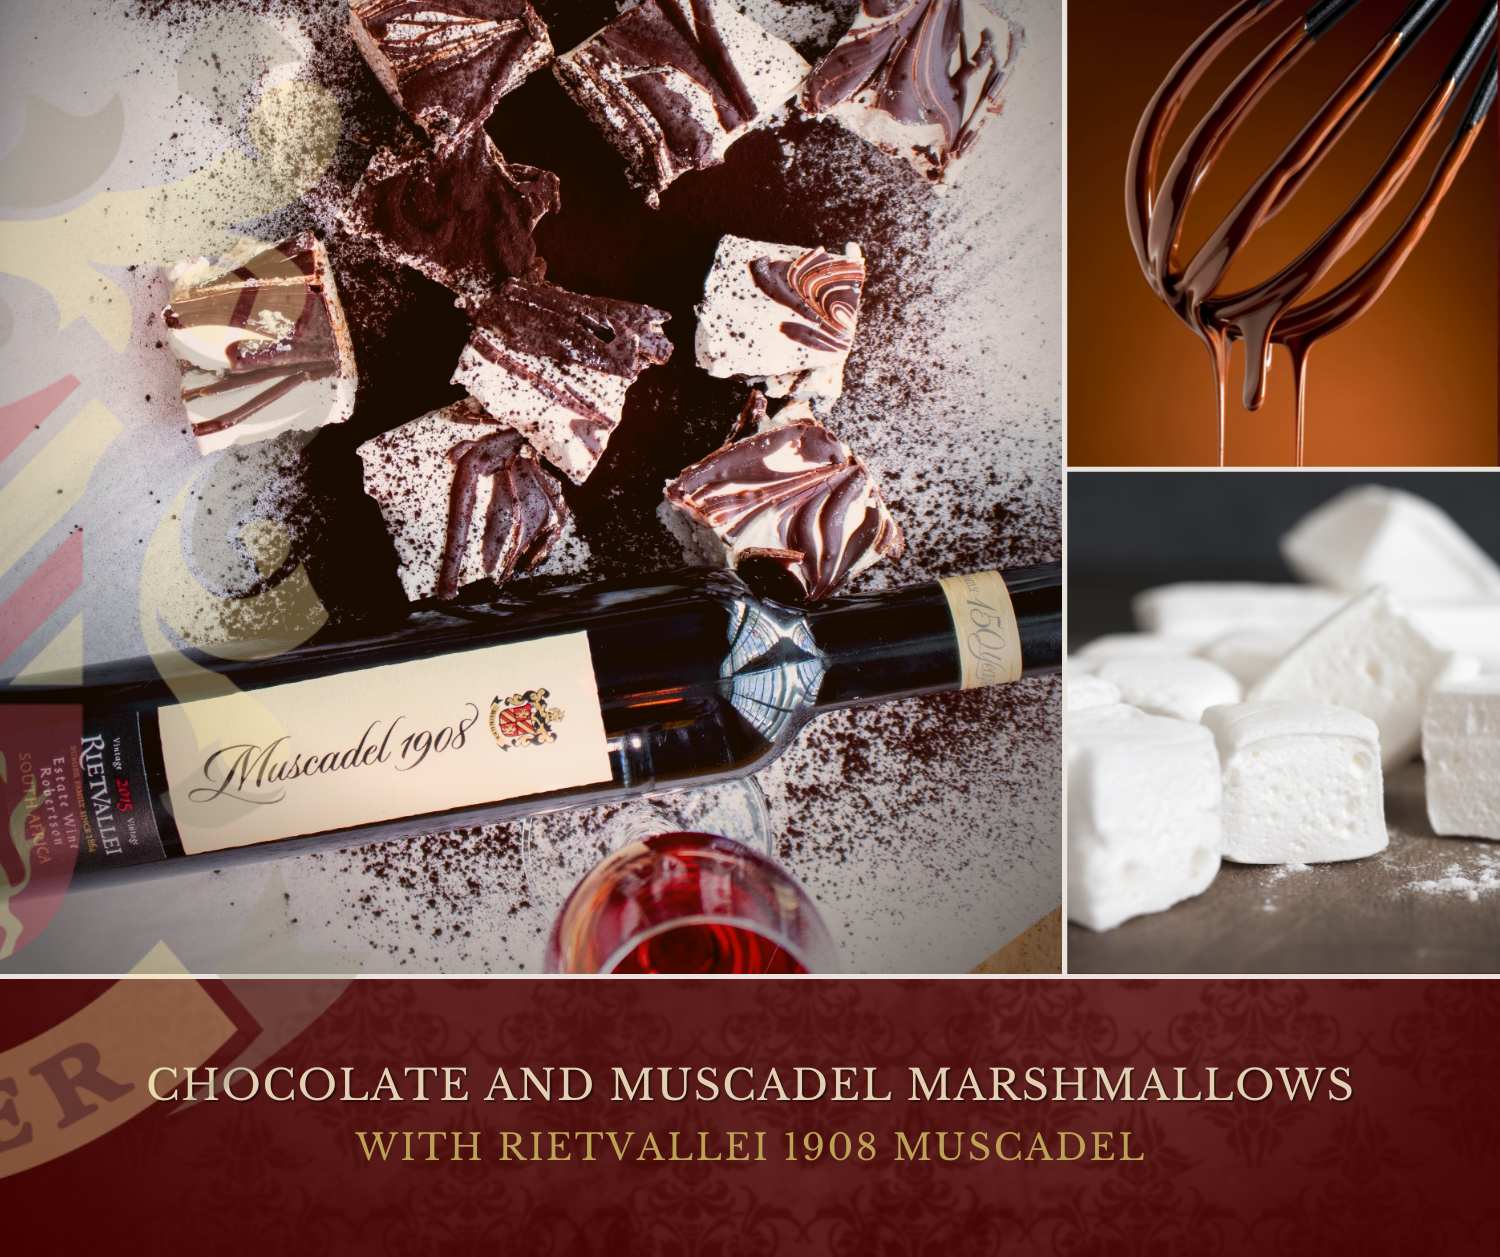 How To Make Chocolate And Muscadel Marshmallows Using Rietvallei 1908 Muscadel photo